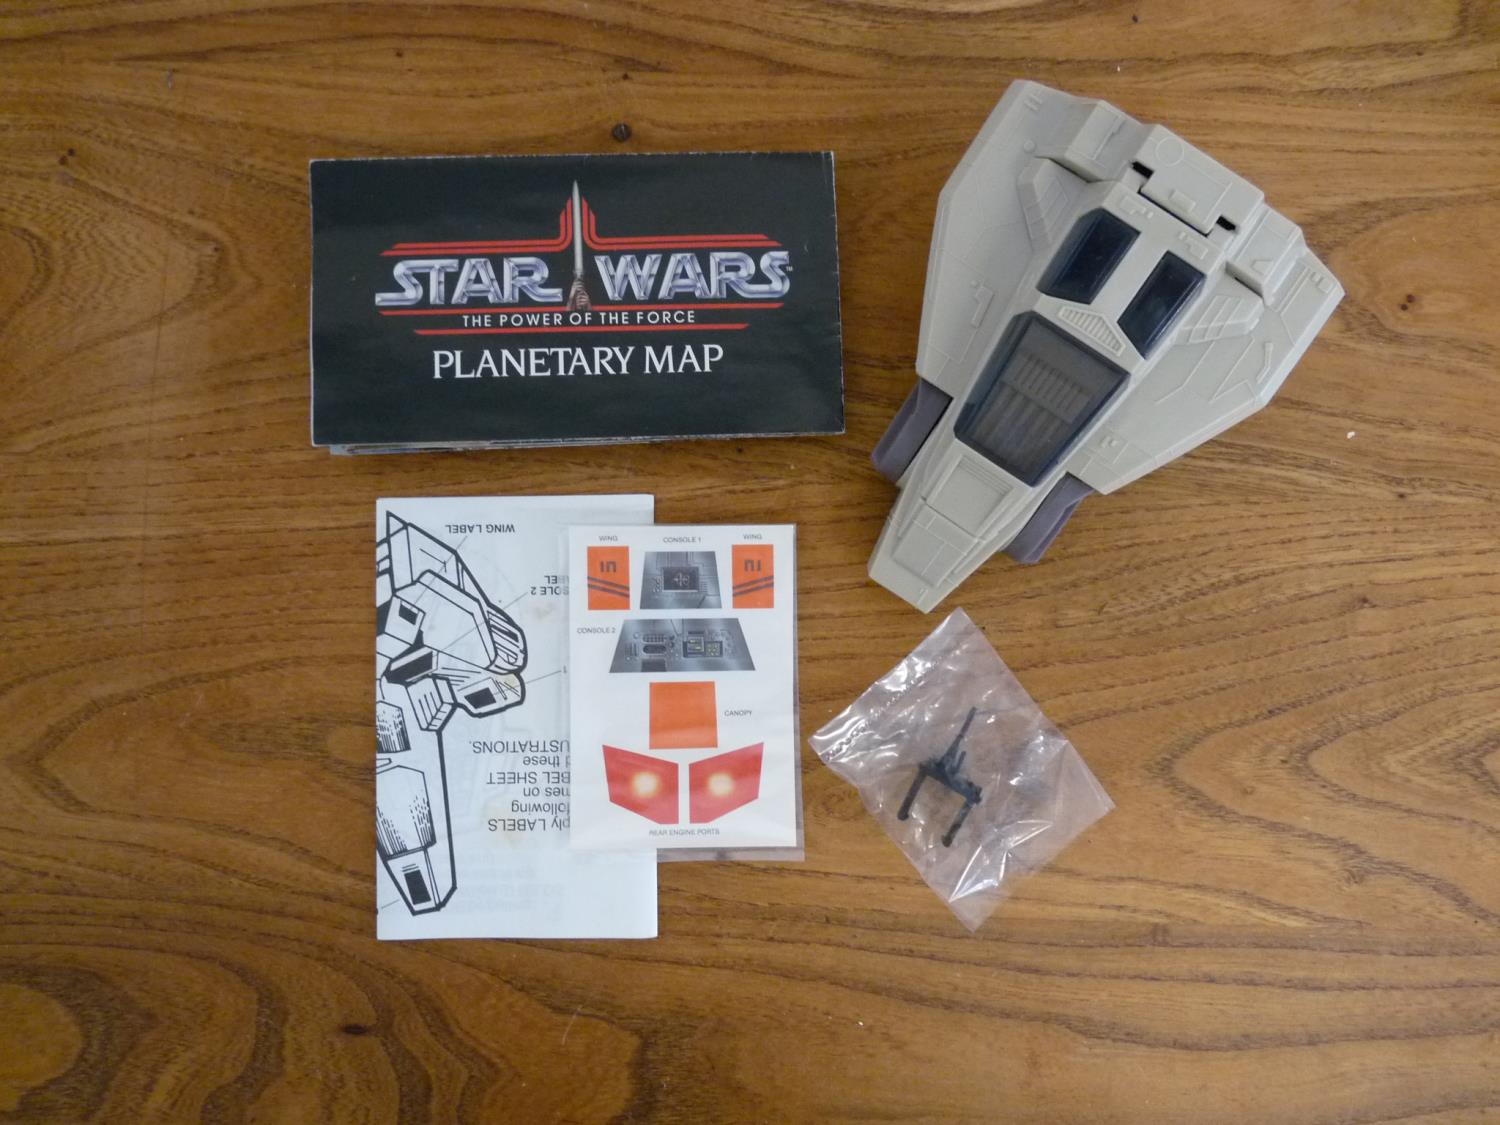 Star Wars Droids ATL Interceptor Vehicle by Kenner Boxed - Image 2 of 2